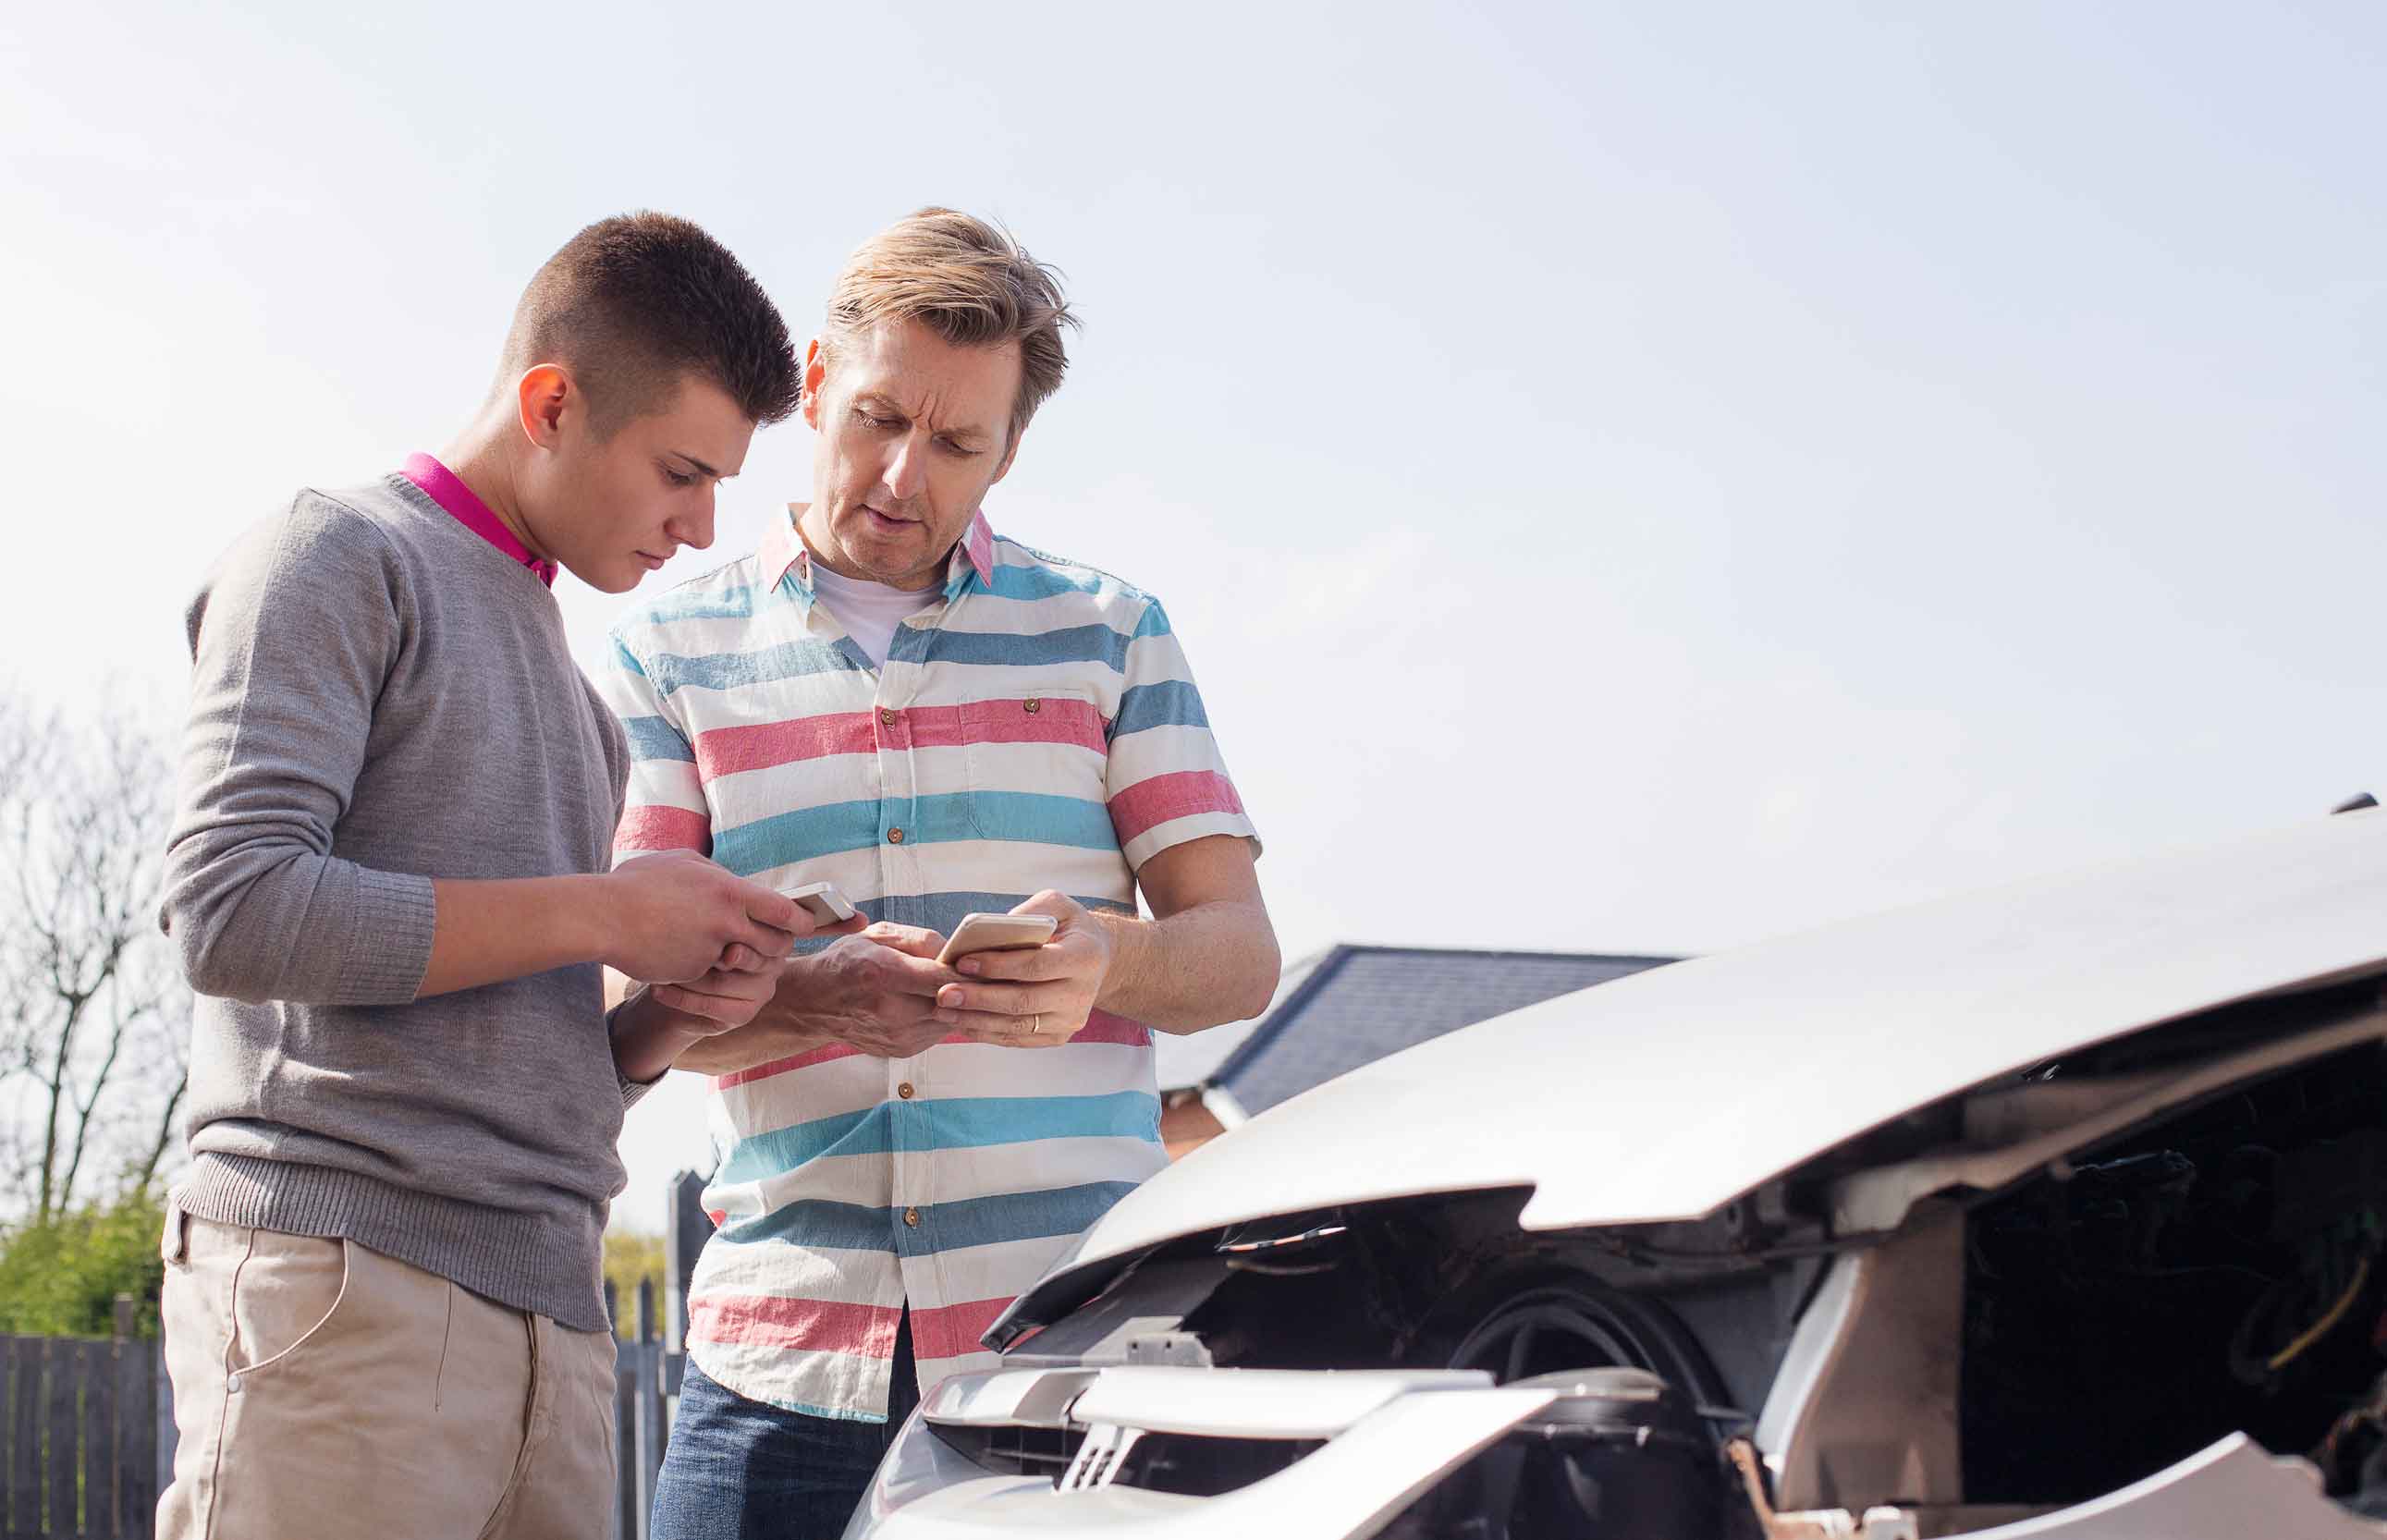 Should you shop around for car insurance? You bet, and here are seven good reasons.